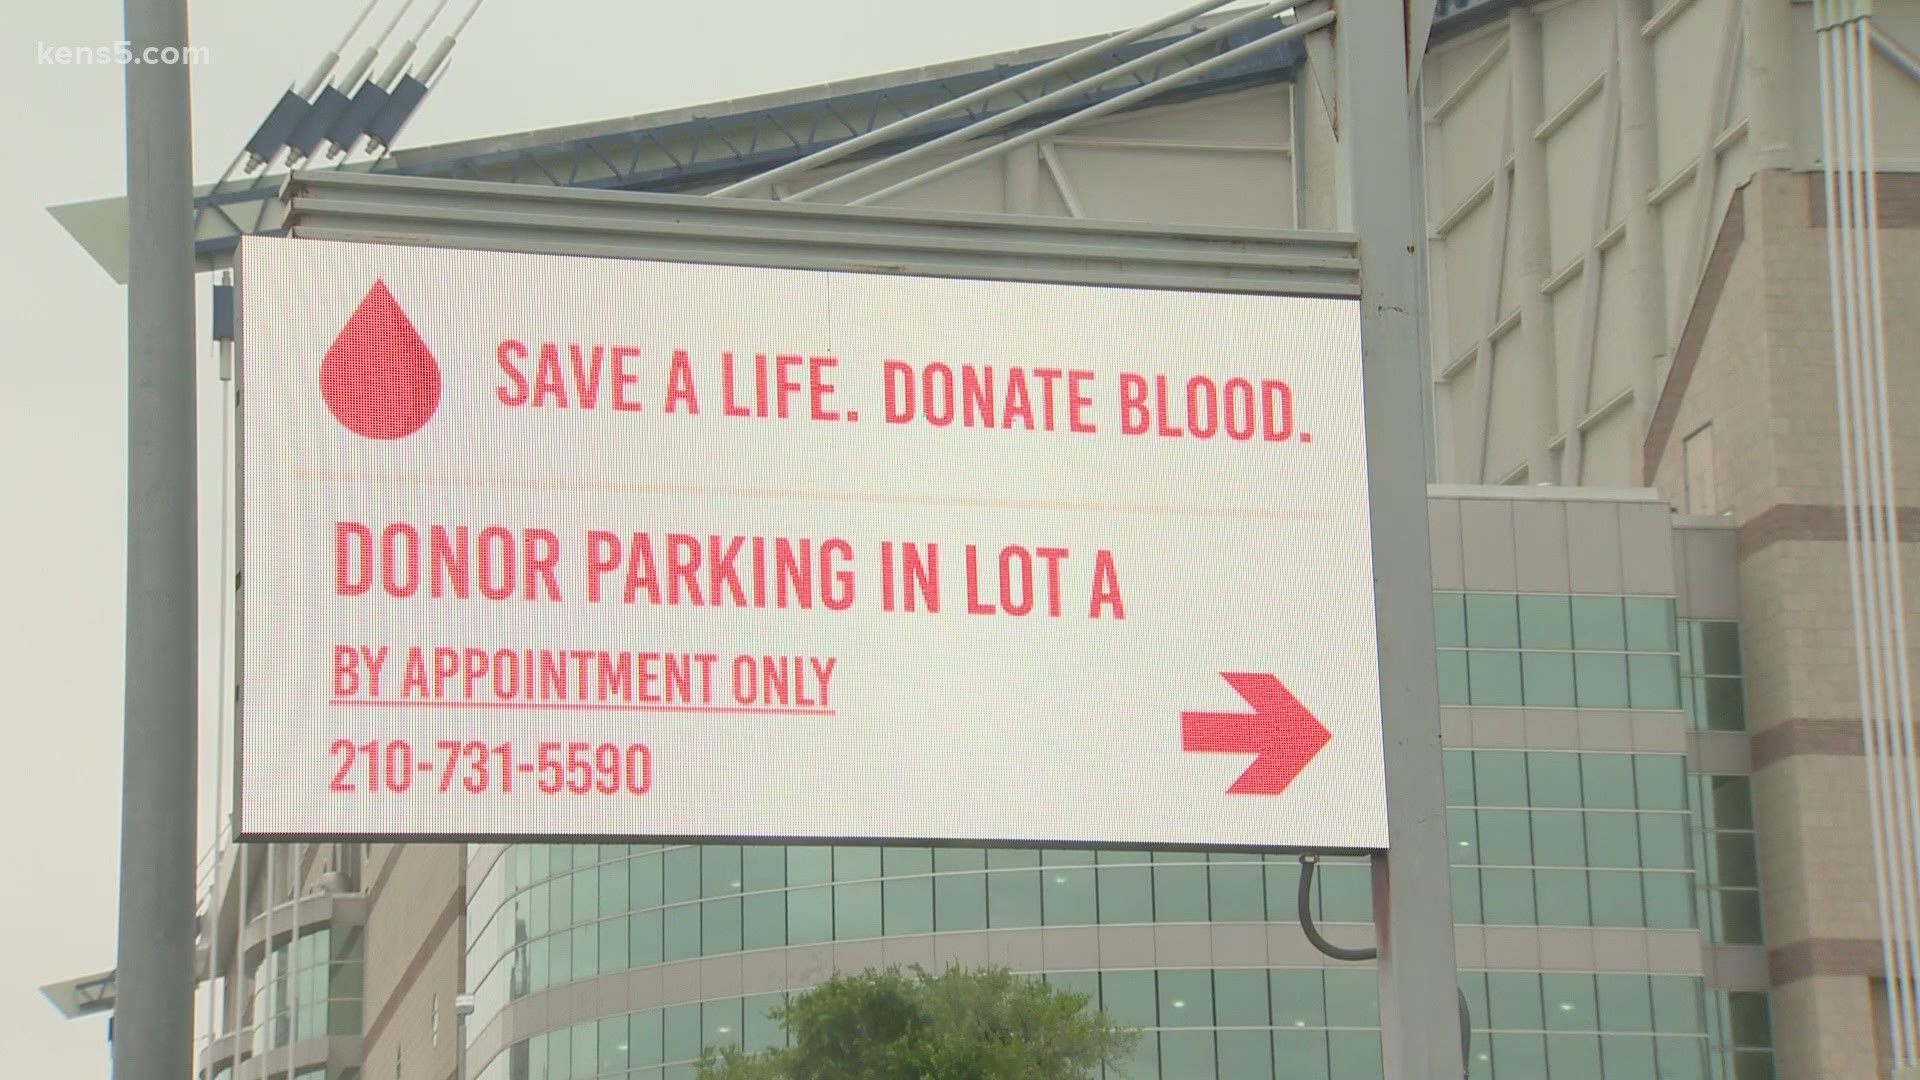 With less people donating and more people traveling, the South Texas Blood & Tissue Center says they need donors to step up and help meet the need.